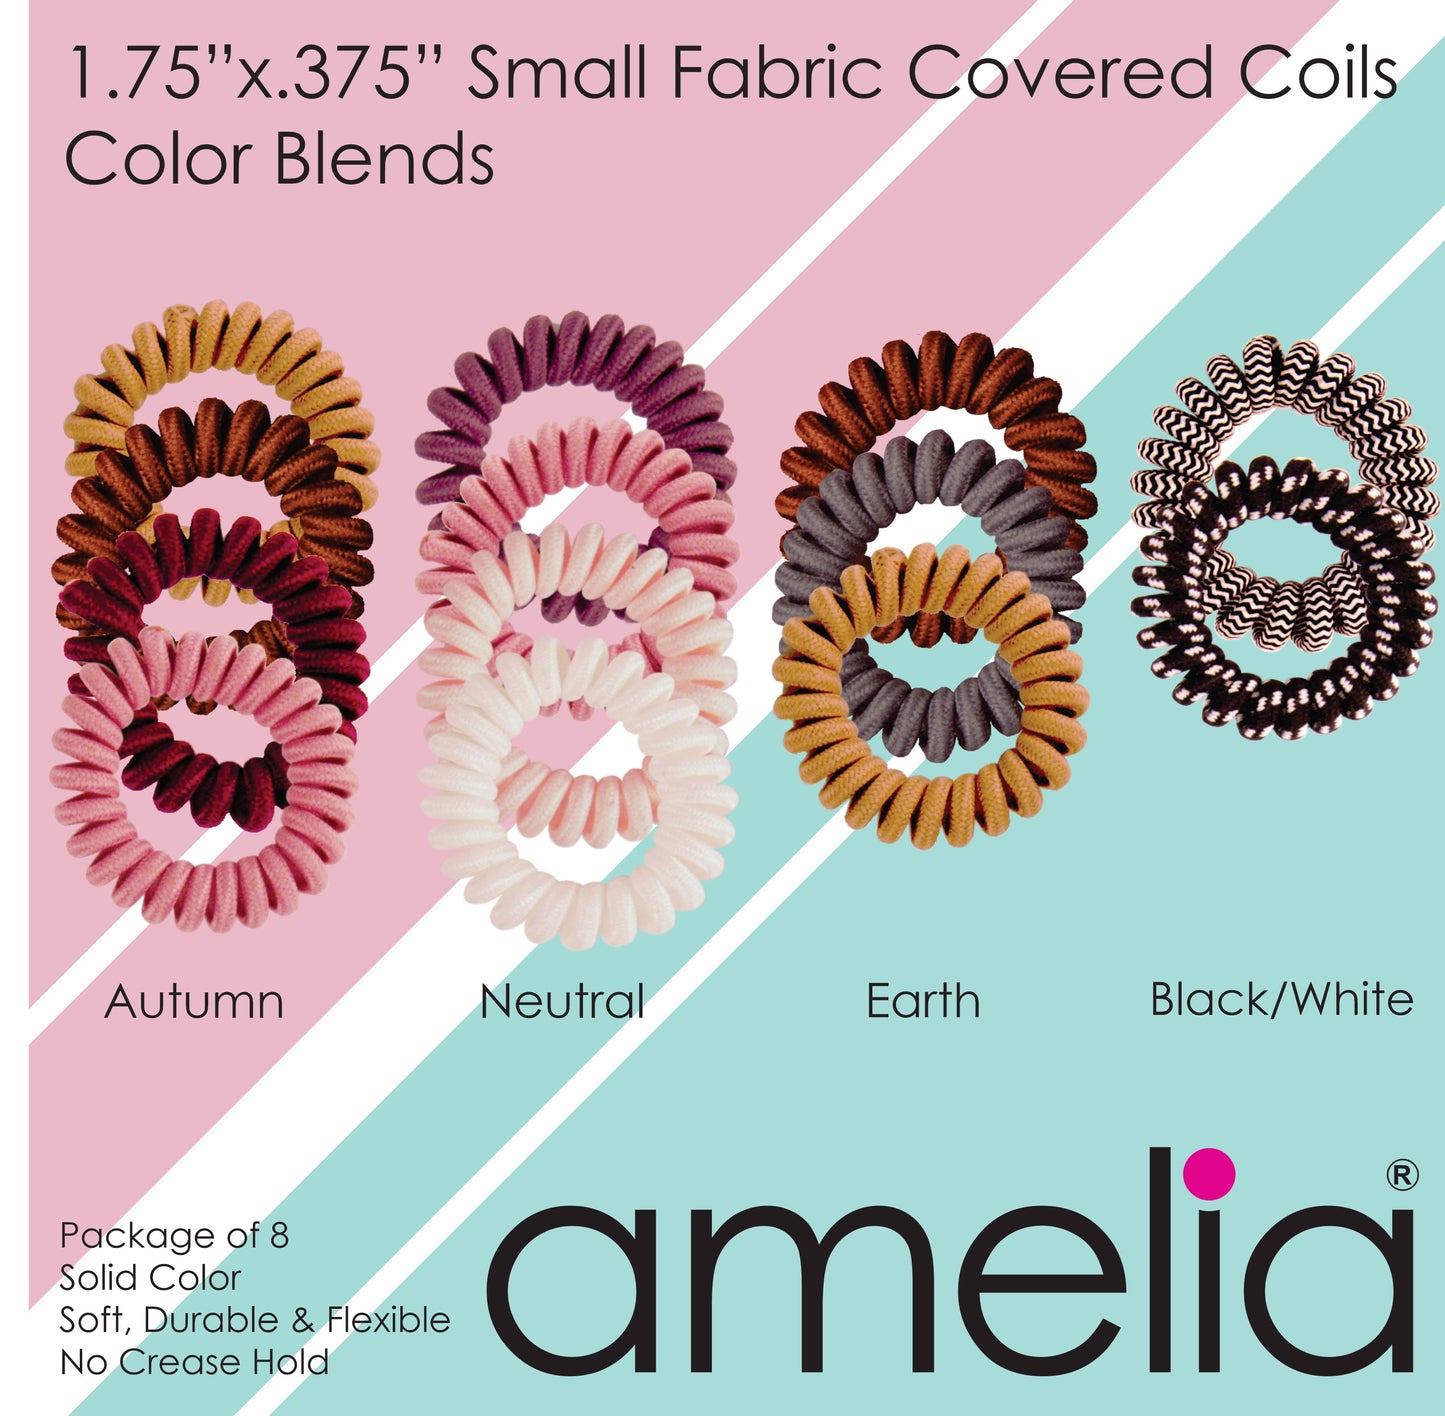 Amelia Beauty, 8 Small Fabric Wrapped Elastic Hair Coils, 1.75in Diameter Spiral Hair Ties, Gentle on Hair, Strong Hold and Minimizes Dents and Creases, Plum